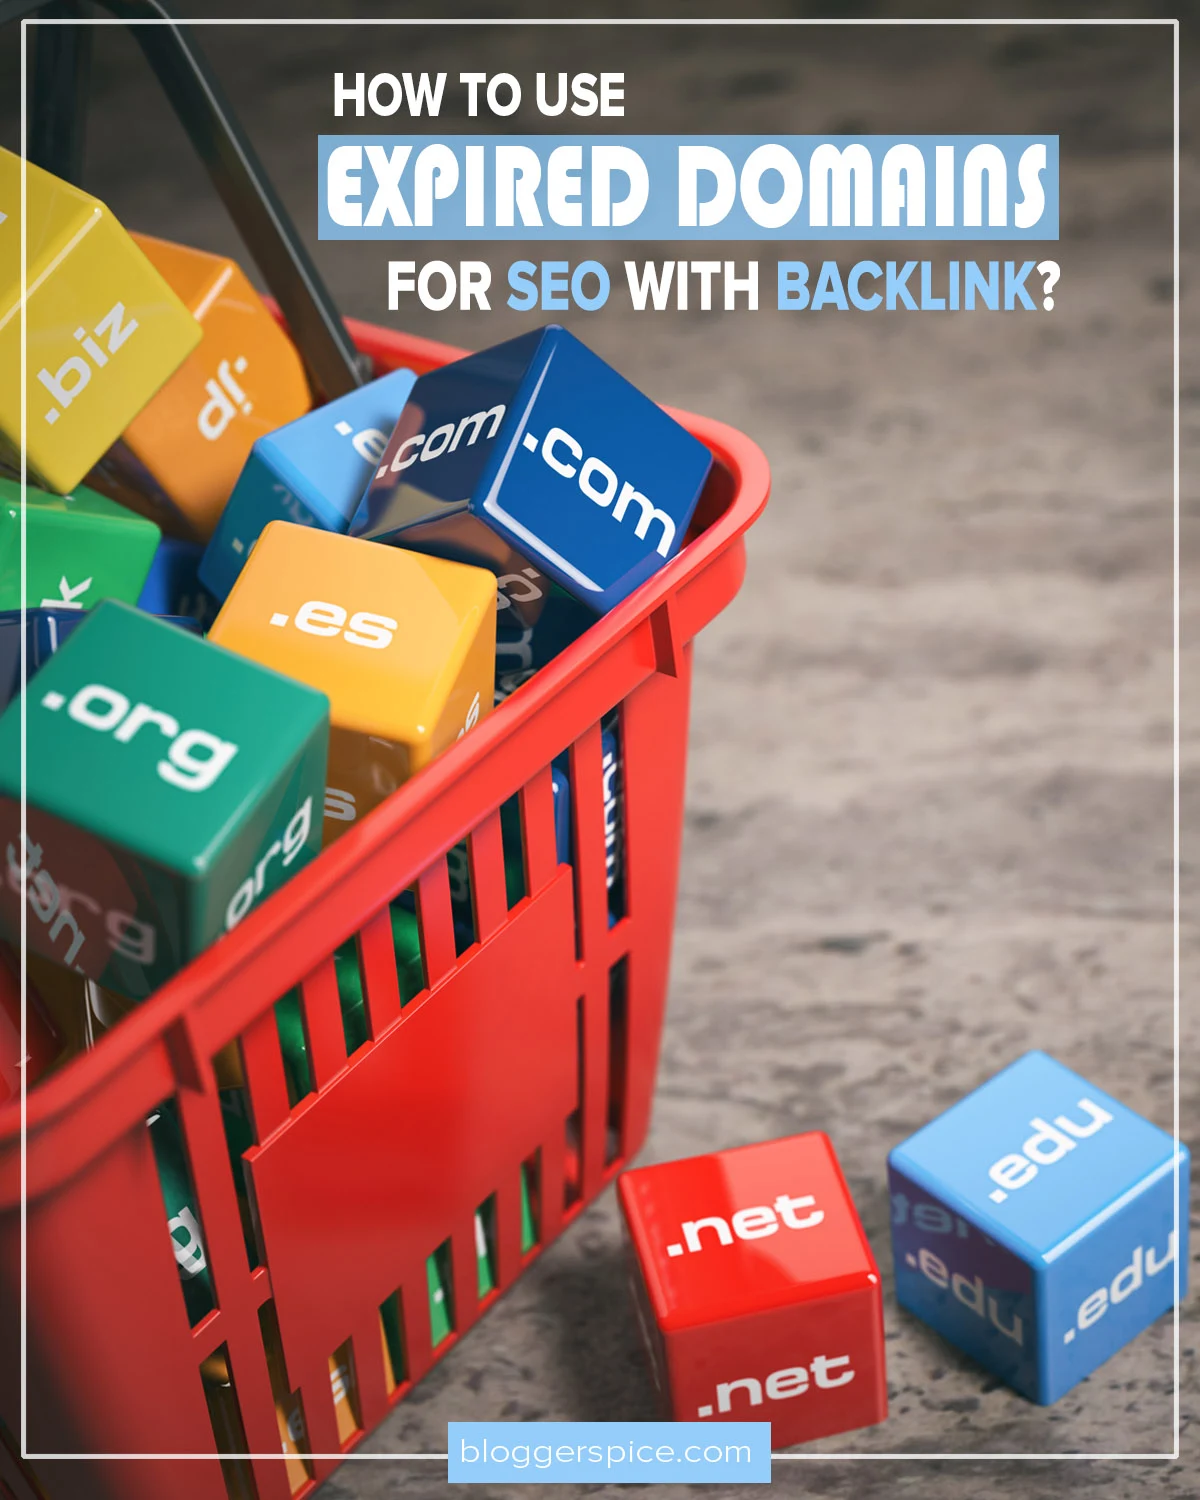 Buying Expired Domains: What's the Best Strategy?